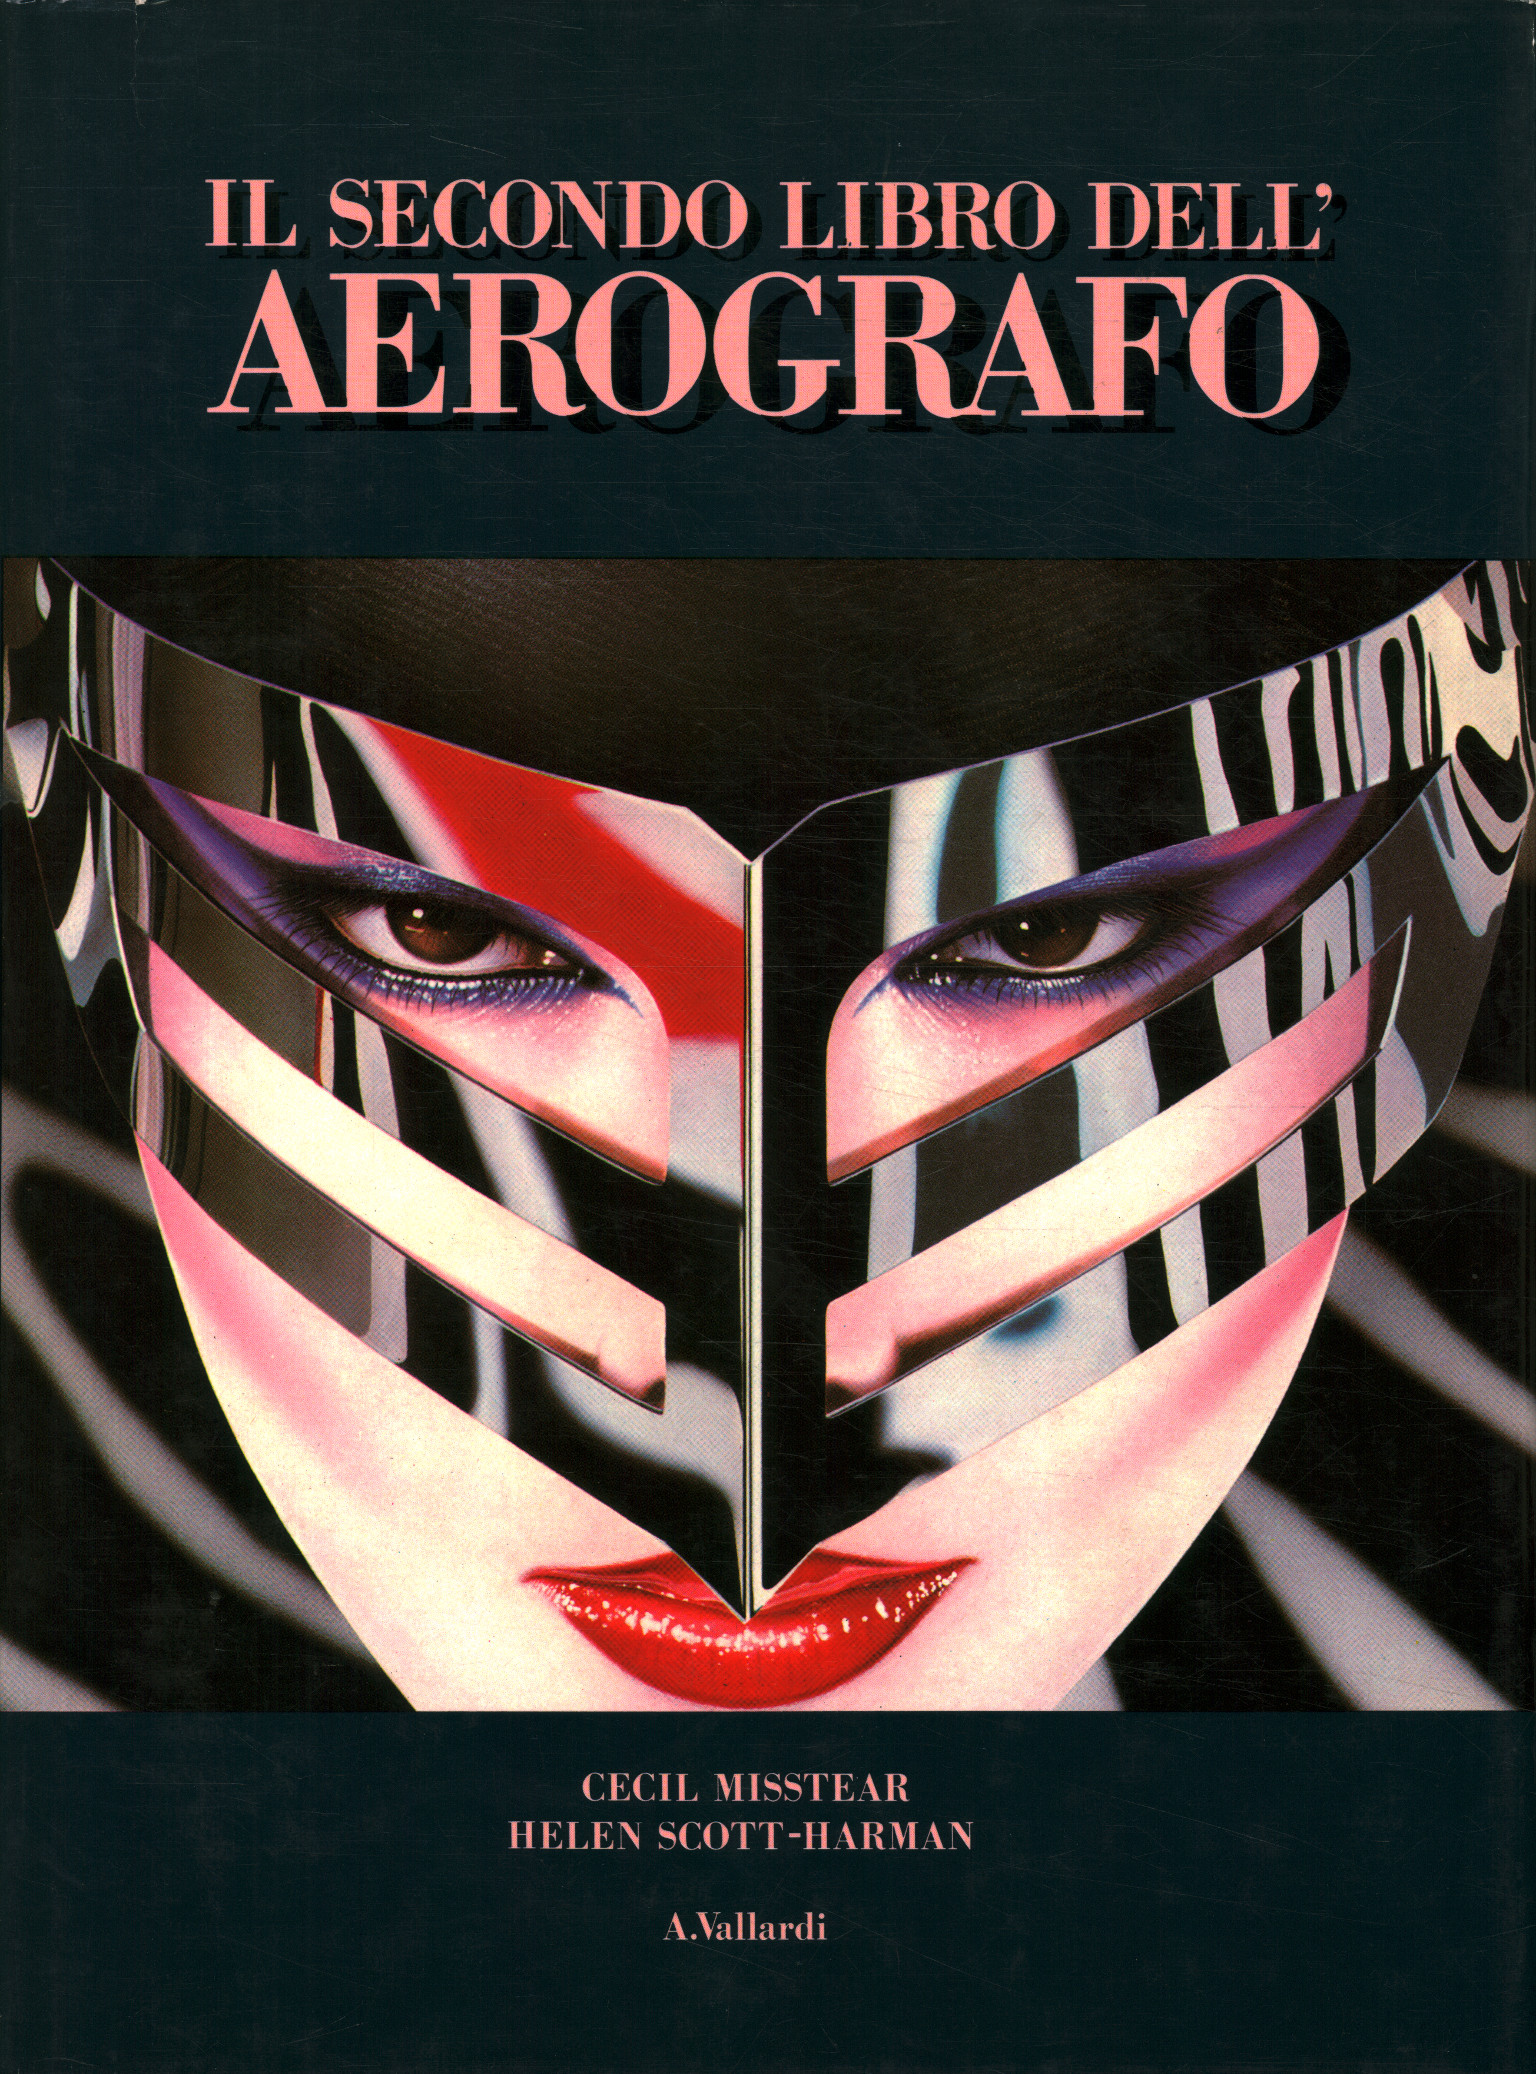 The second book of the airbrush